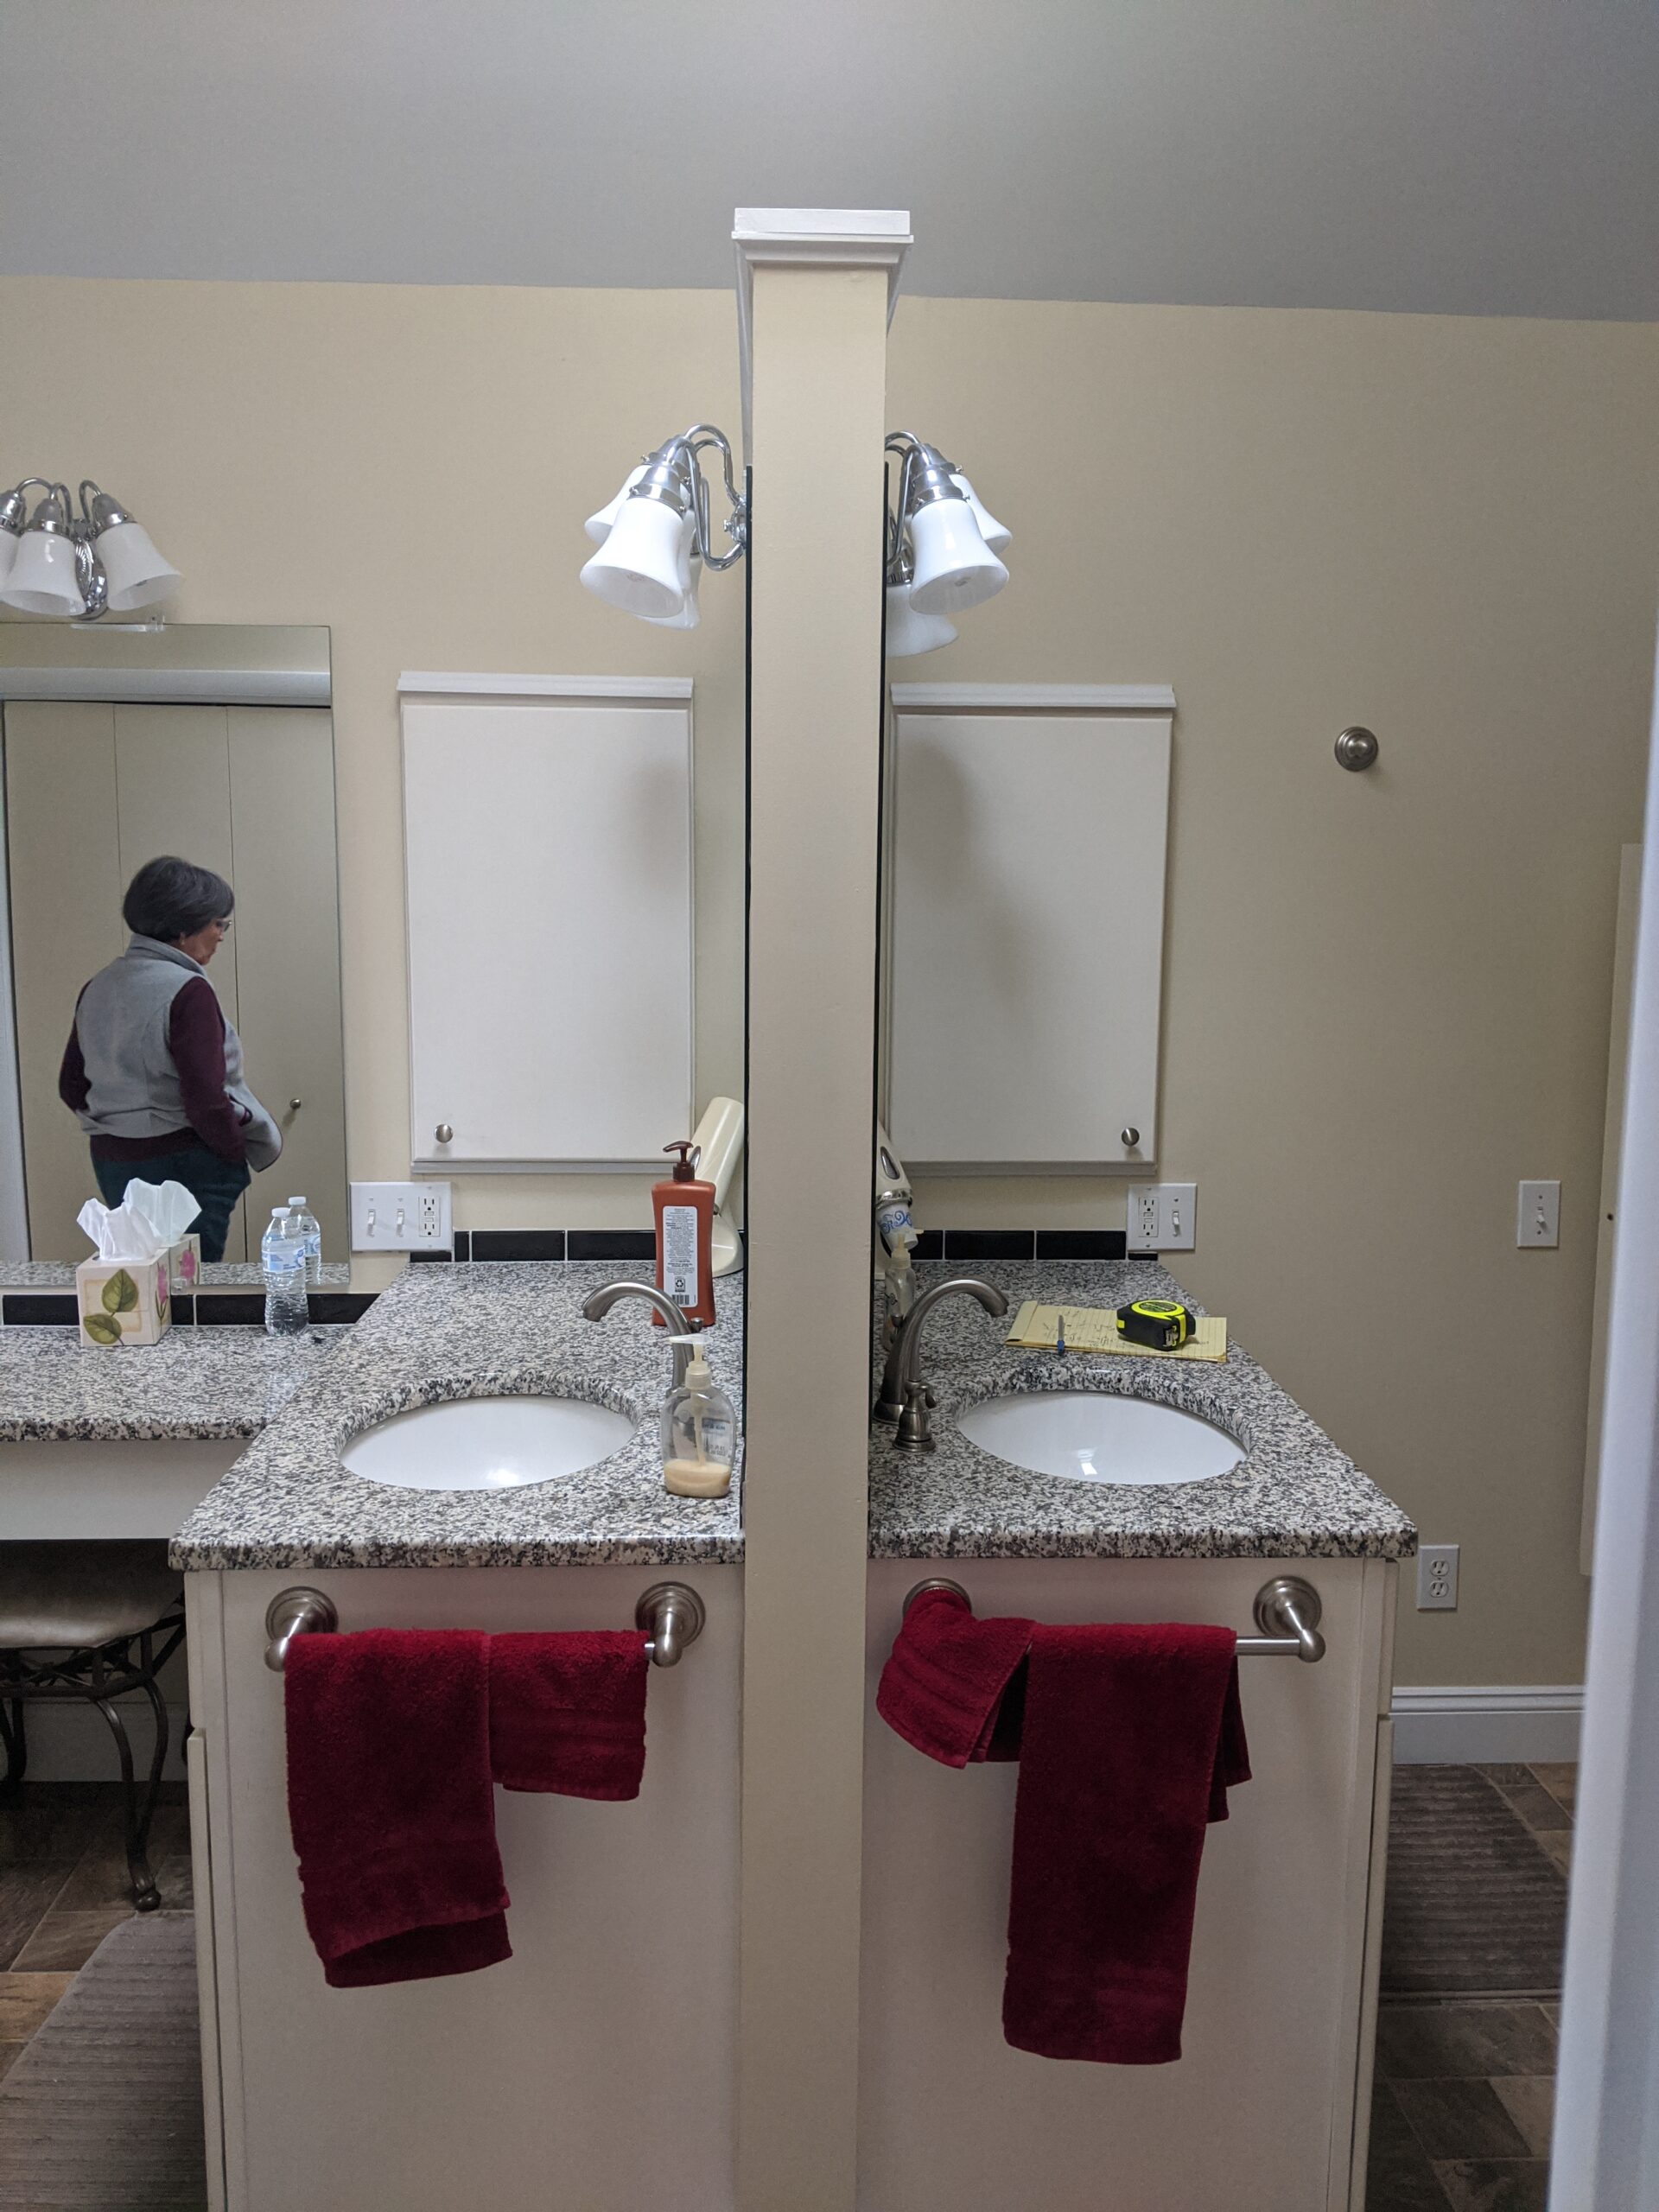 This picture is showing the vanities back to back in the middle of the room, it blocked the flow of traffic in the bathroom